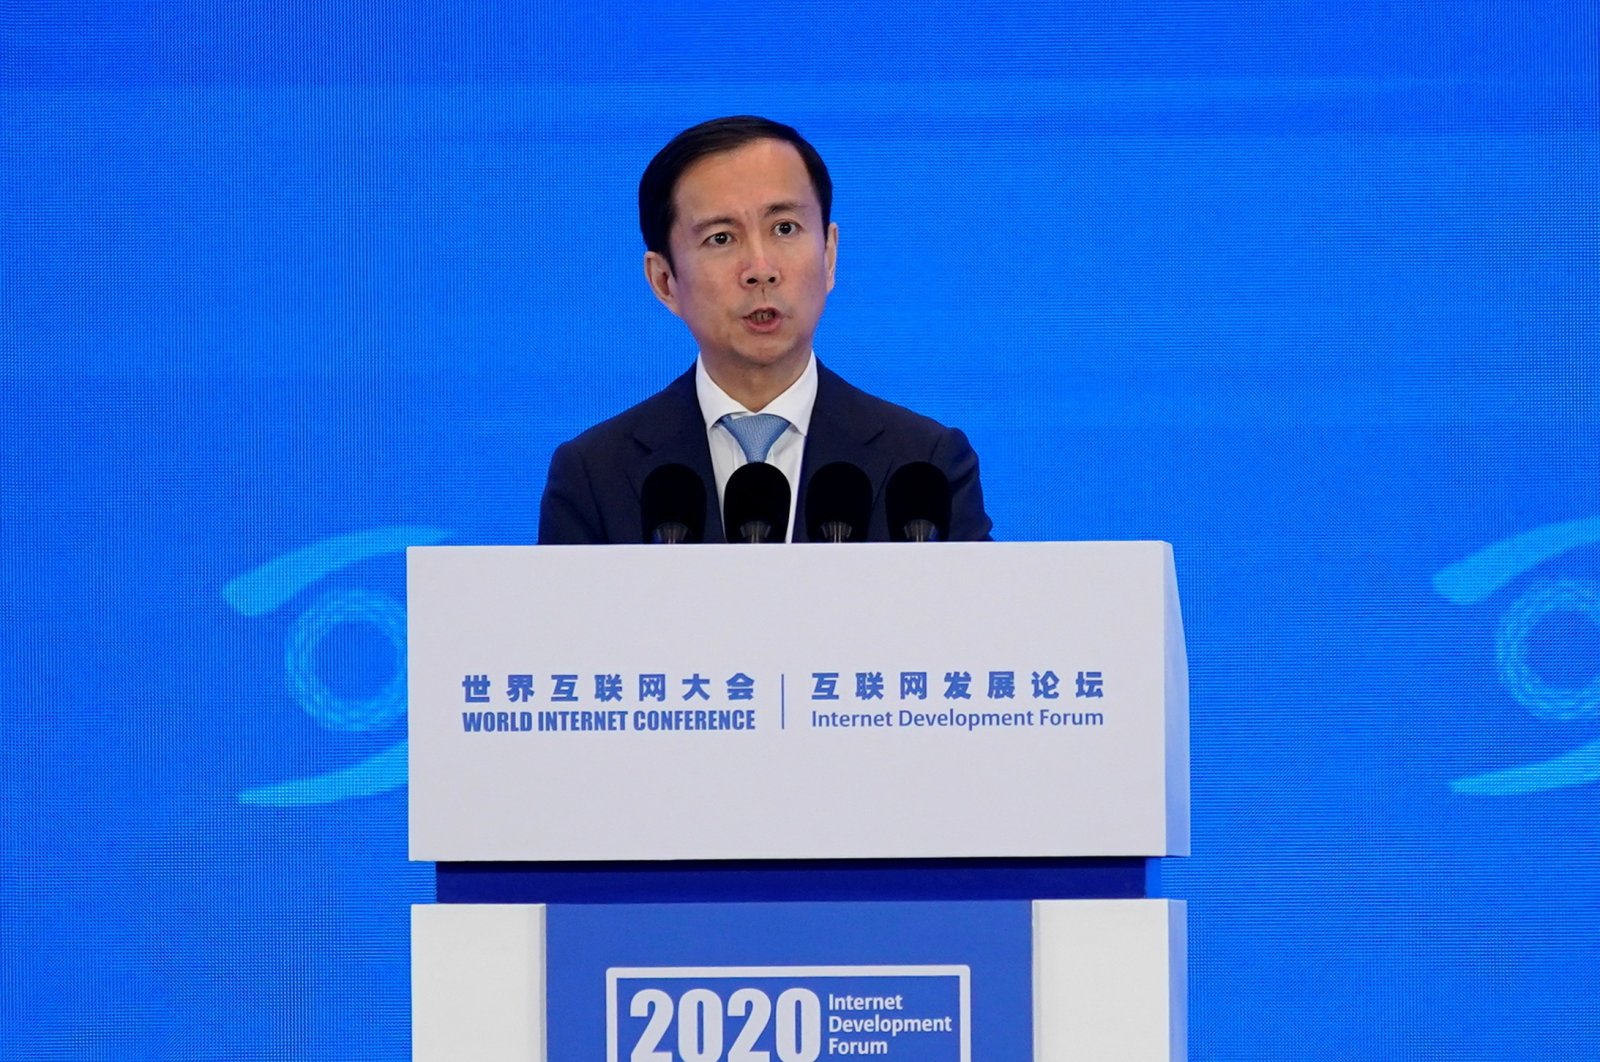 Alibaba Group CEO Daniel Zhang speaks at the World Internet Conference (WIC) in Wuzhen, Zhejiang province, China, Nov. 23, 2020. (Reuters Photo)